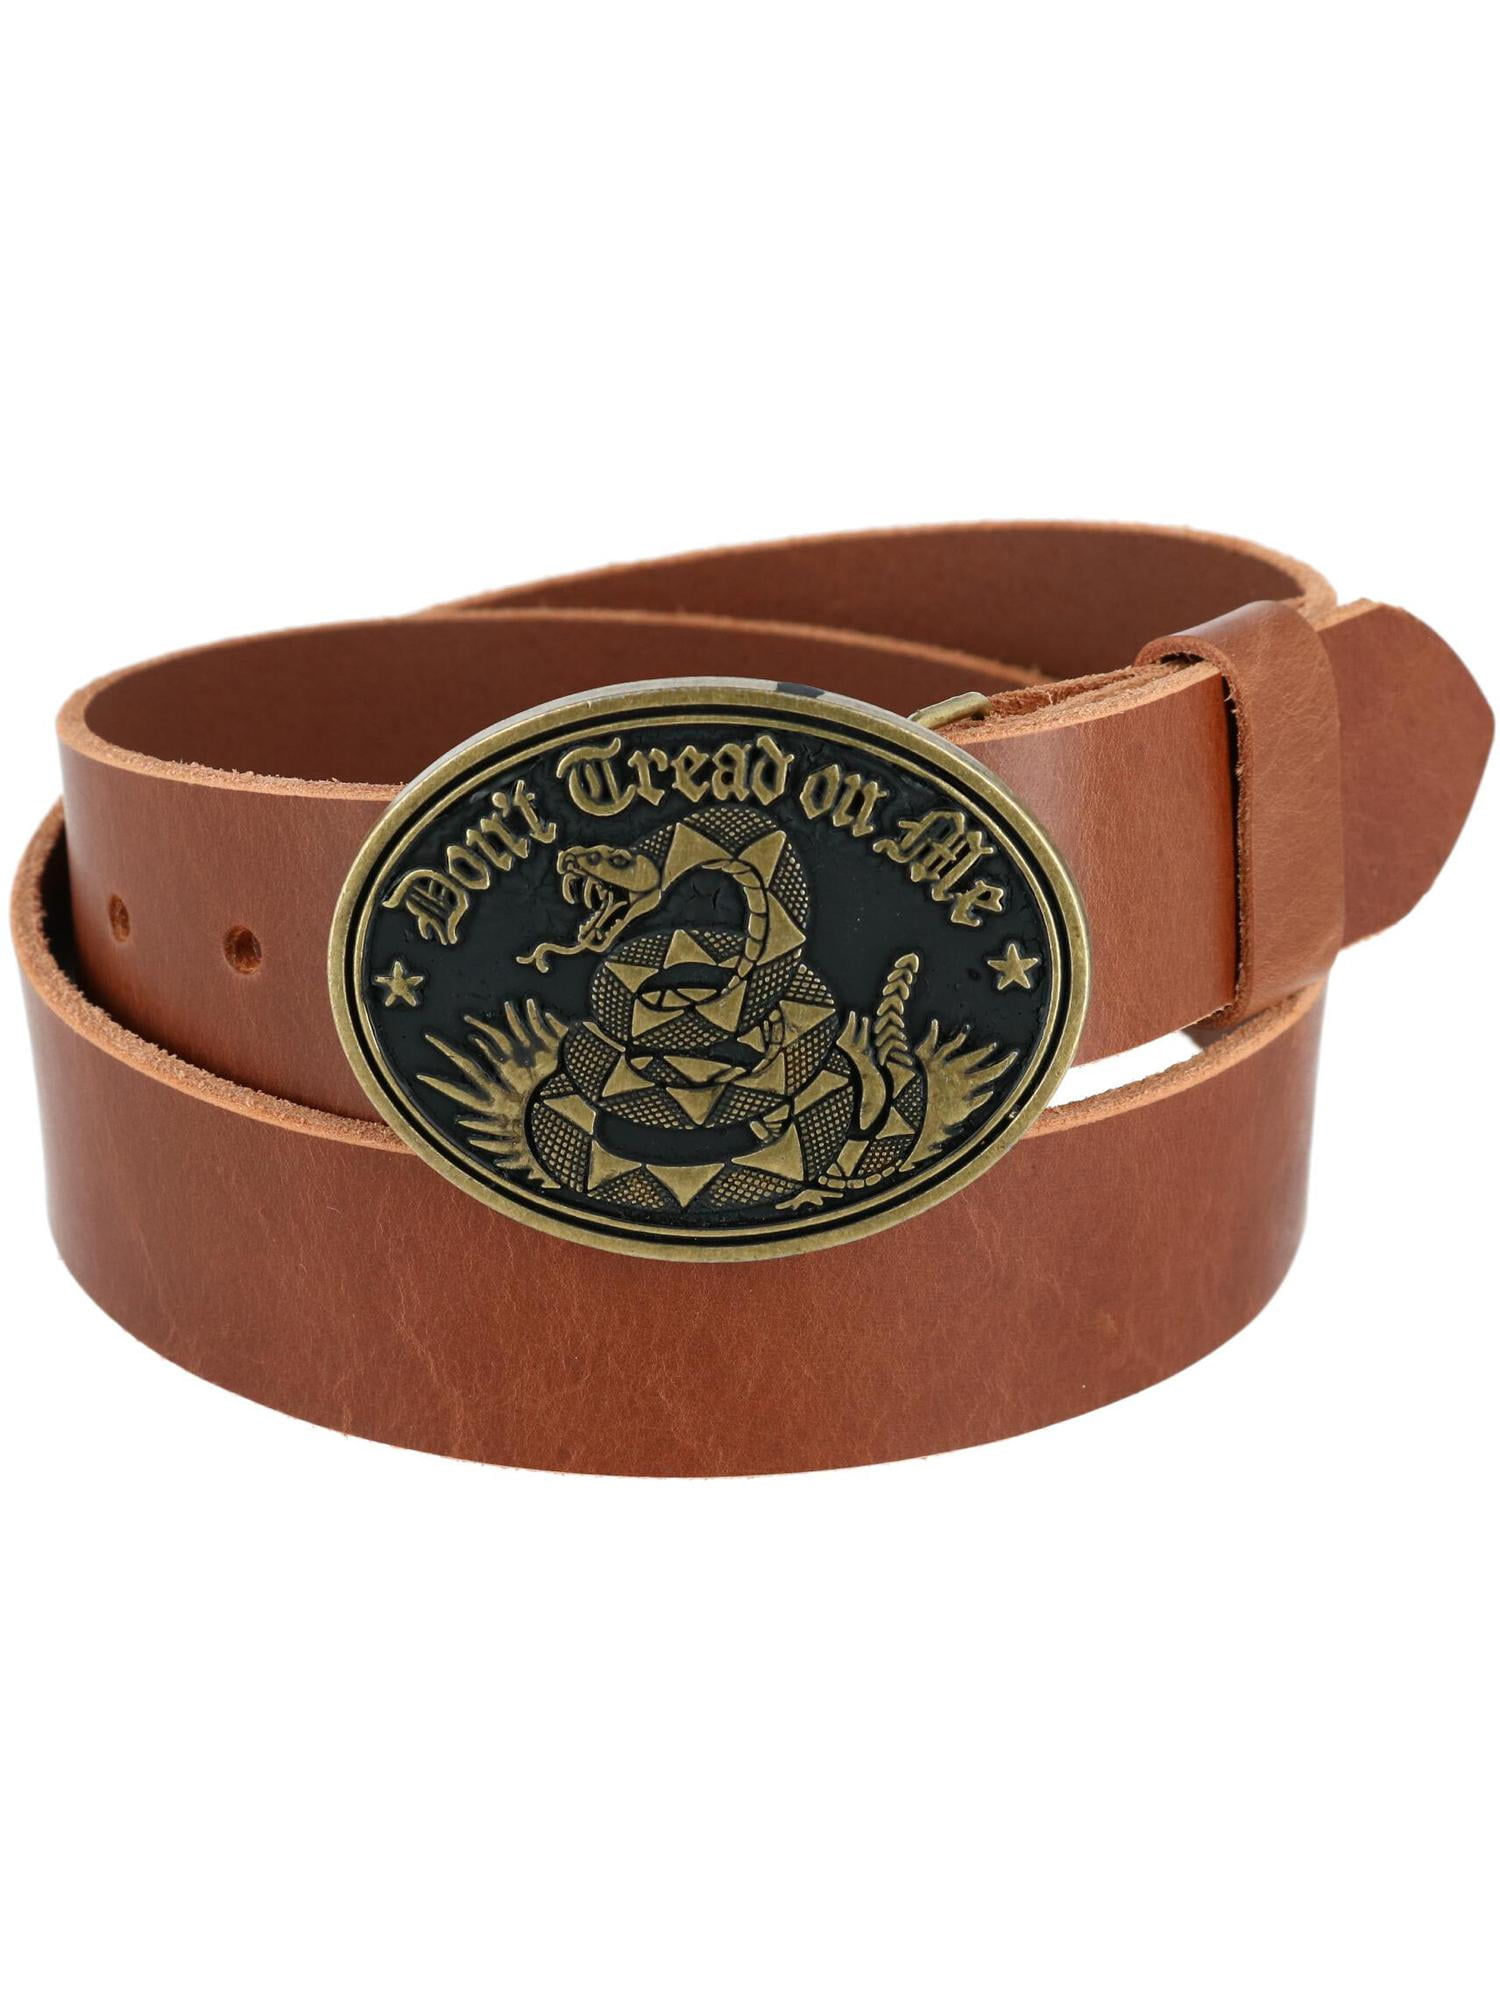 1.5" Wide Men's Western Traditional Leather Belt Rodeo Cowboy Belt Two-Tone 